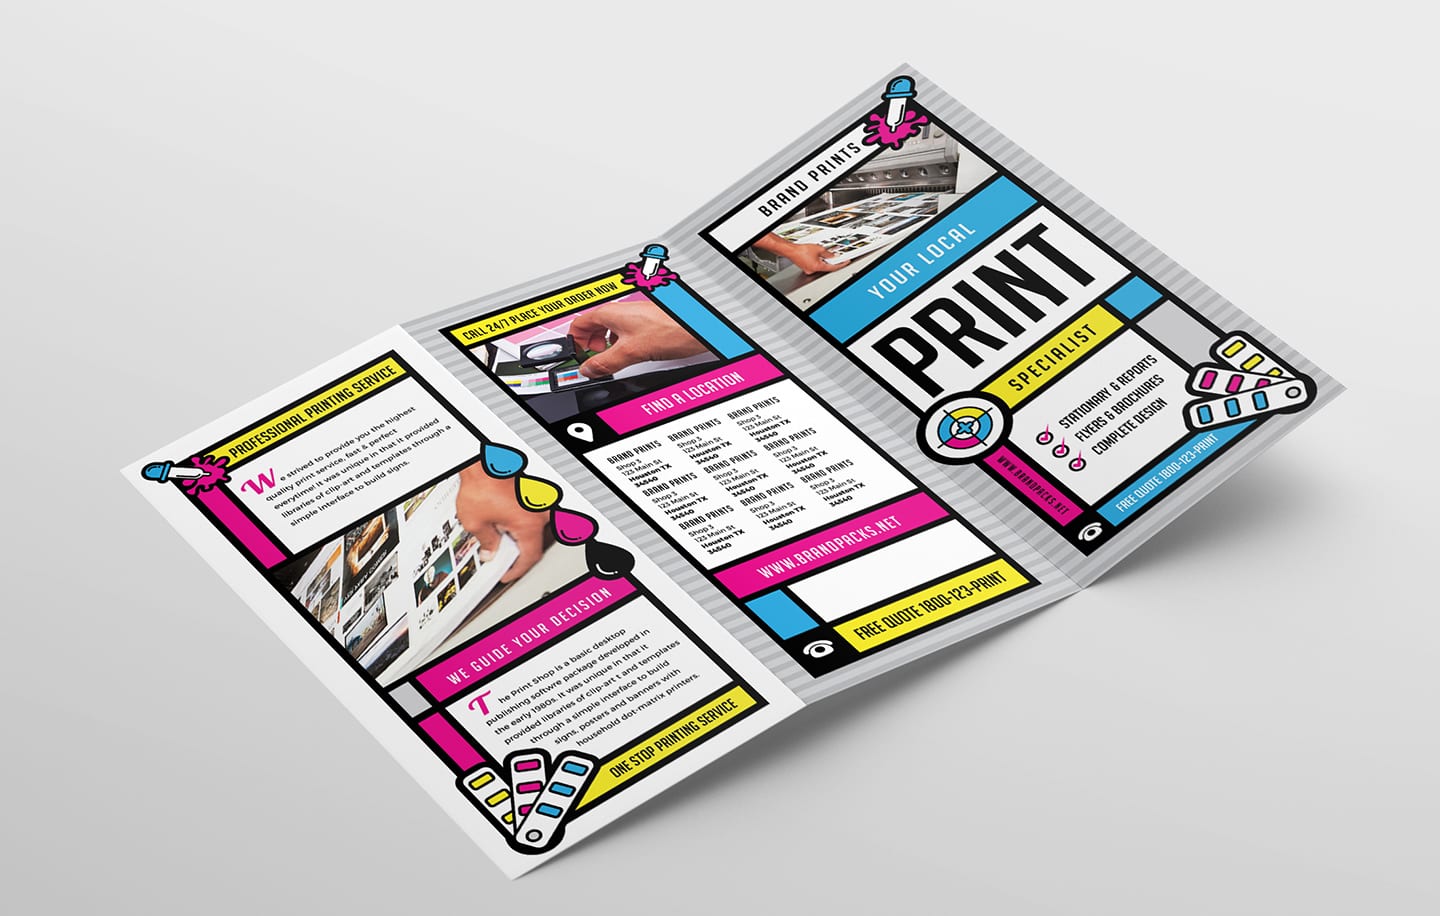 Free Shop Templates for Local Printing Services - BrandPacks